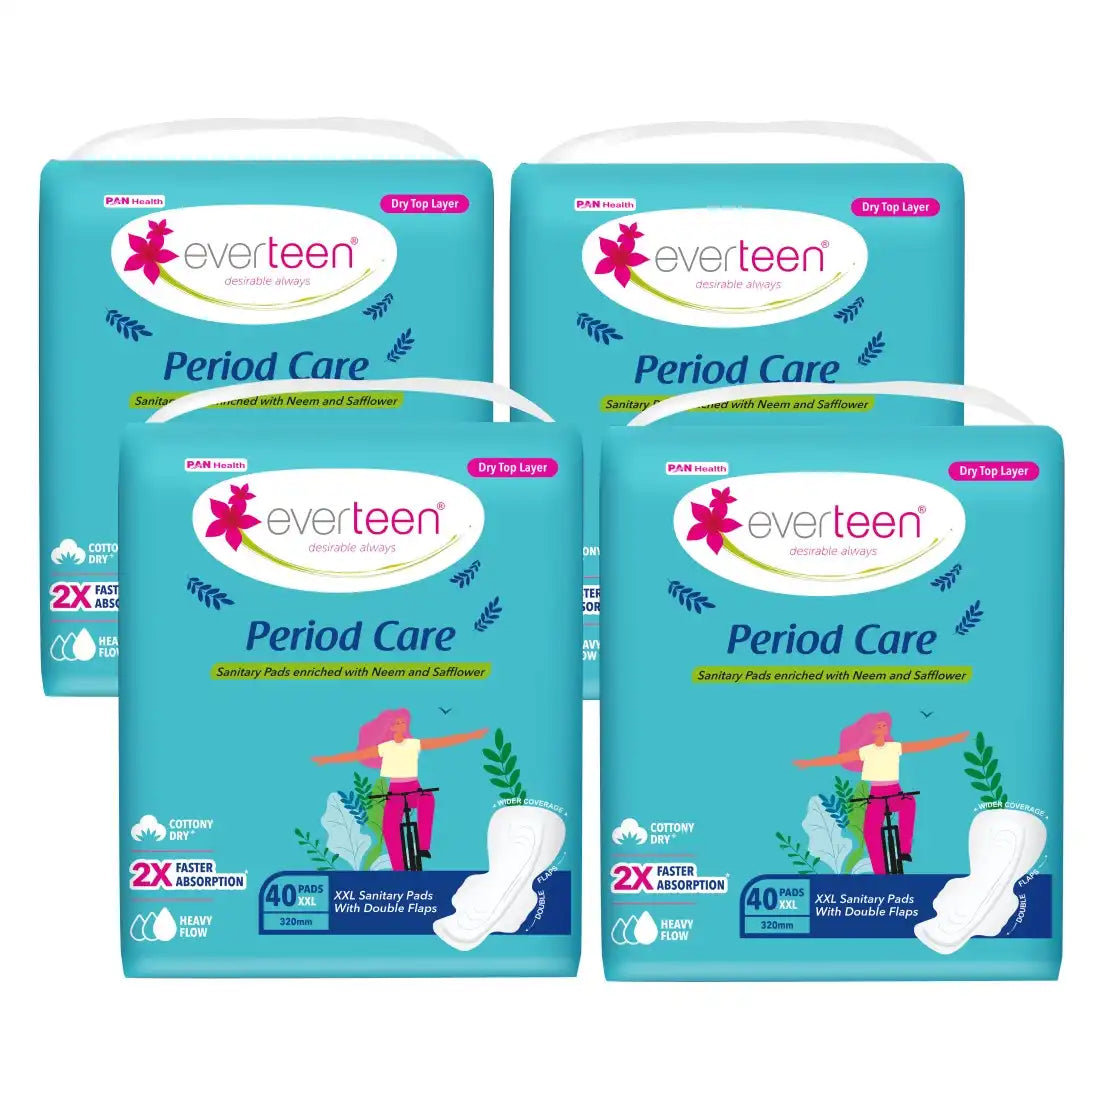 Buy 4 Packs everteen Period Care XXL Dry Neem-Safflower Sanitary Pads with Double Wings - 40 Pads, 320mm - everteen